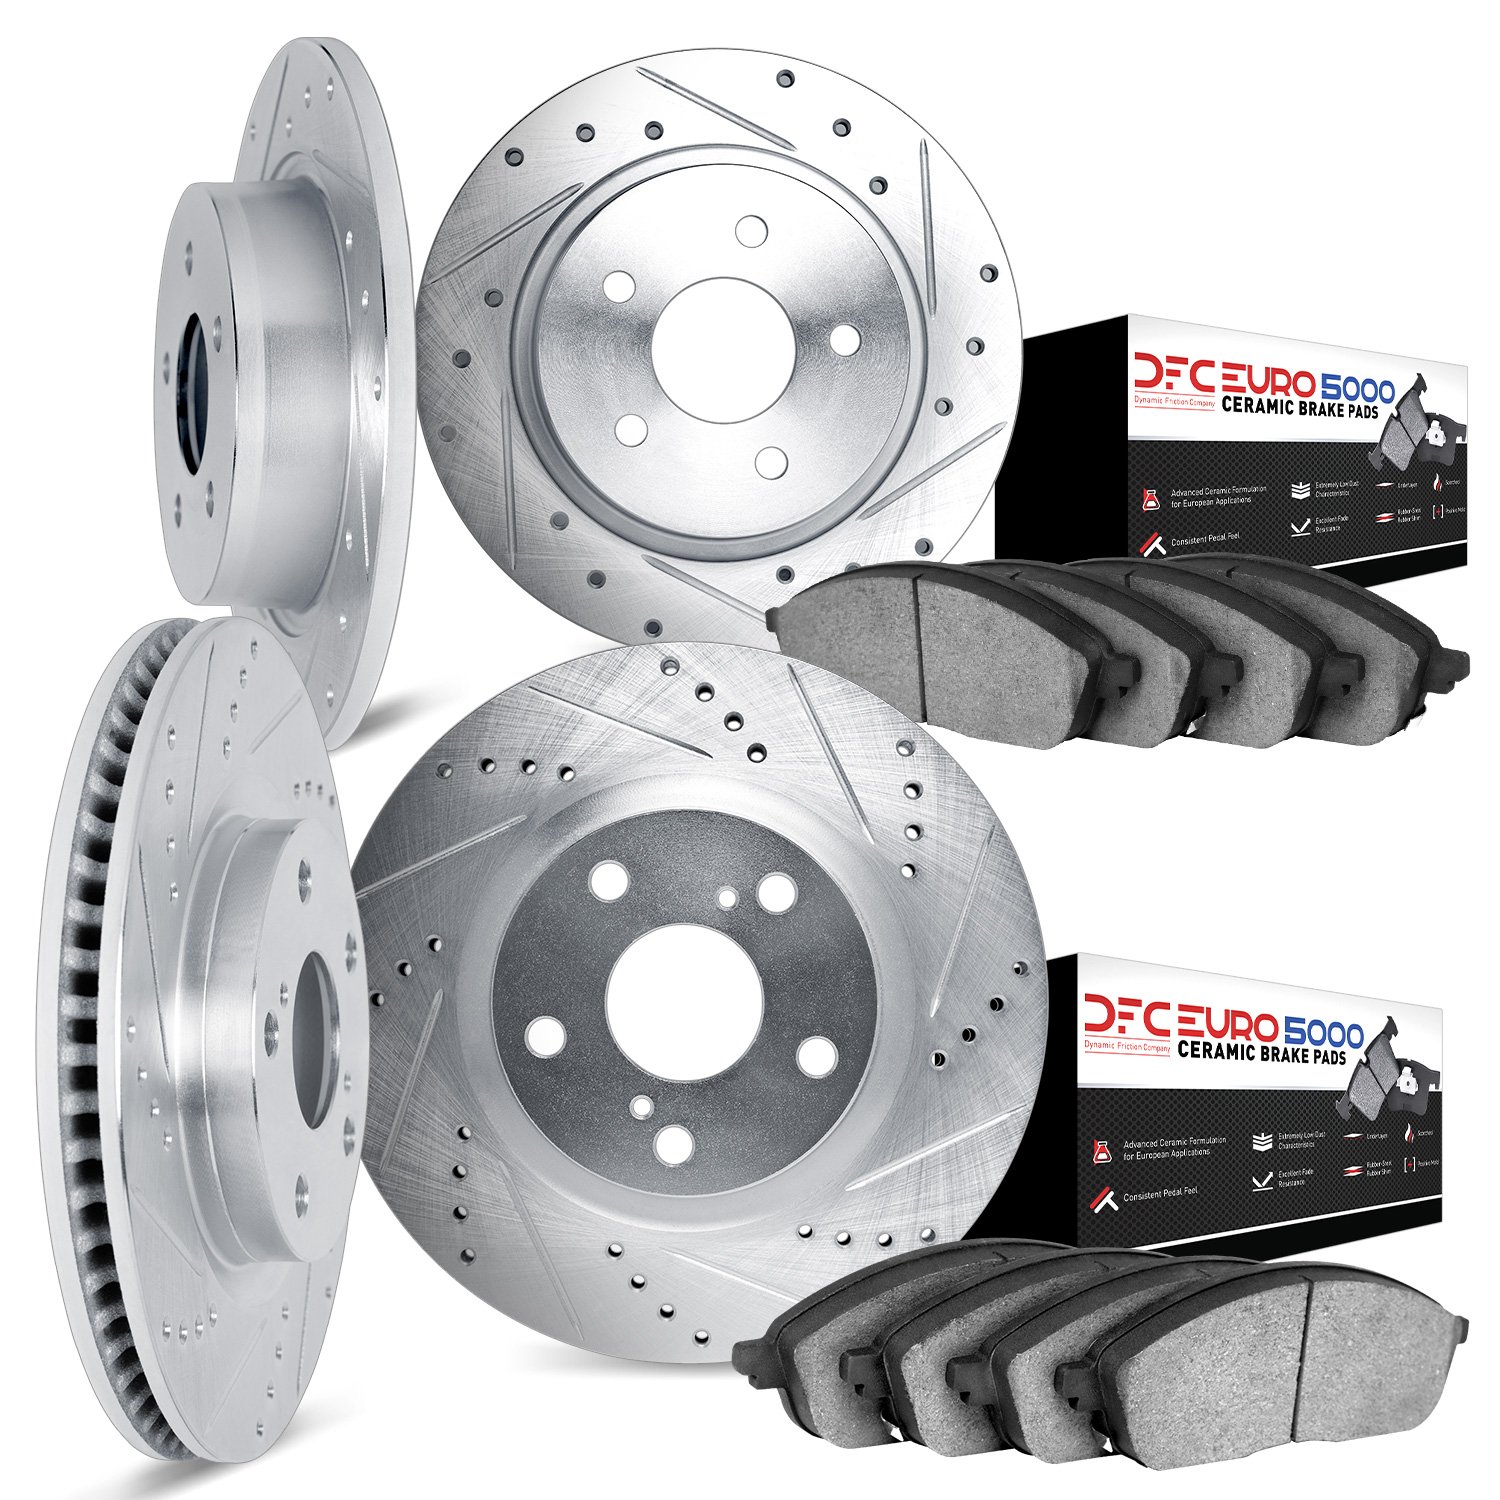 7604-11000 Drilled/Slotted Brake Rotors w/5000 Euro Ceramic Brake Pads Kit [Silver], 1994-2002 Land Rover, Position: Front and R